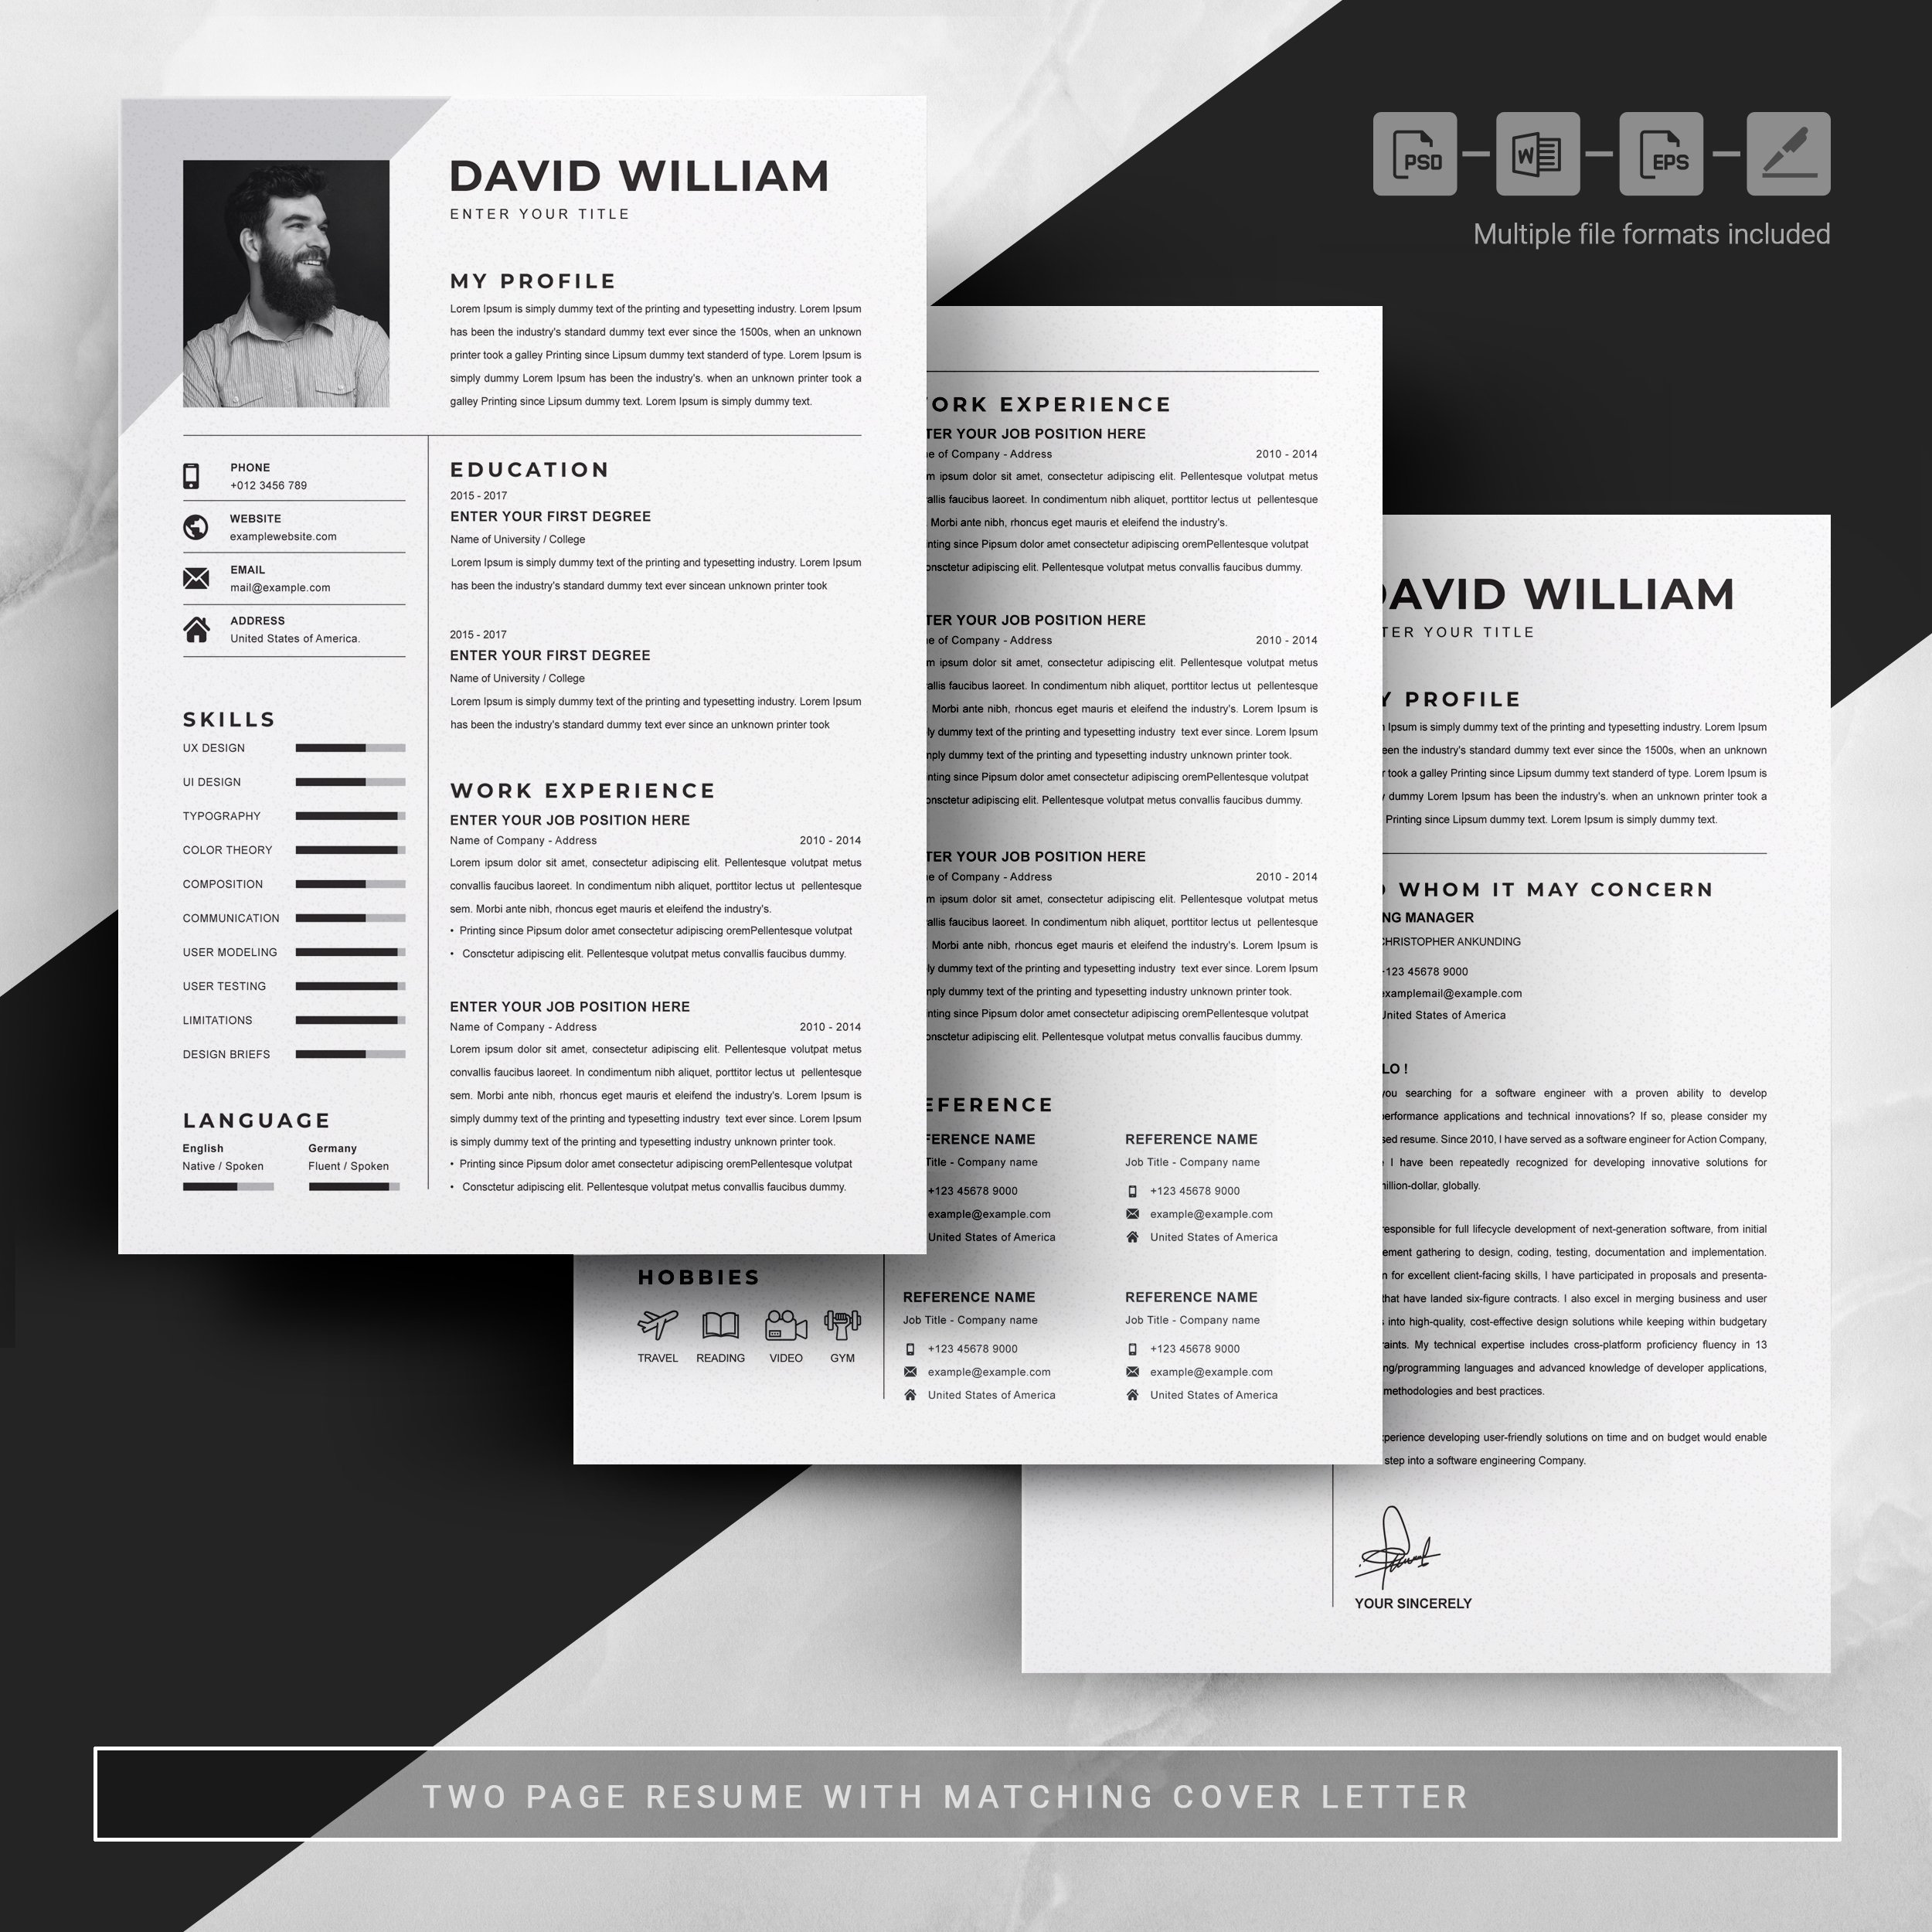 04 3 pages free resume design template 624